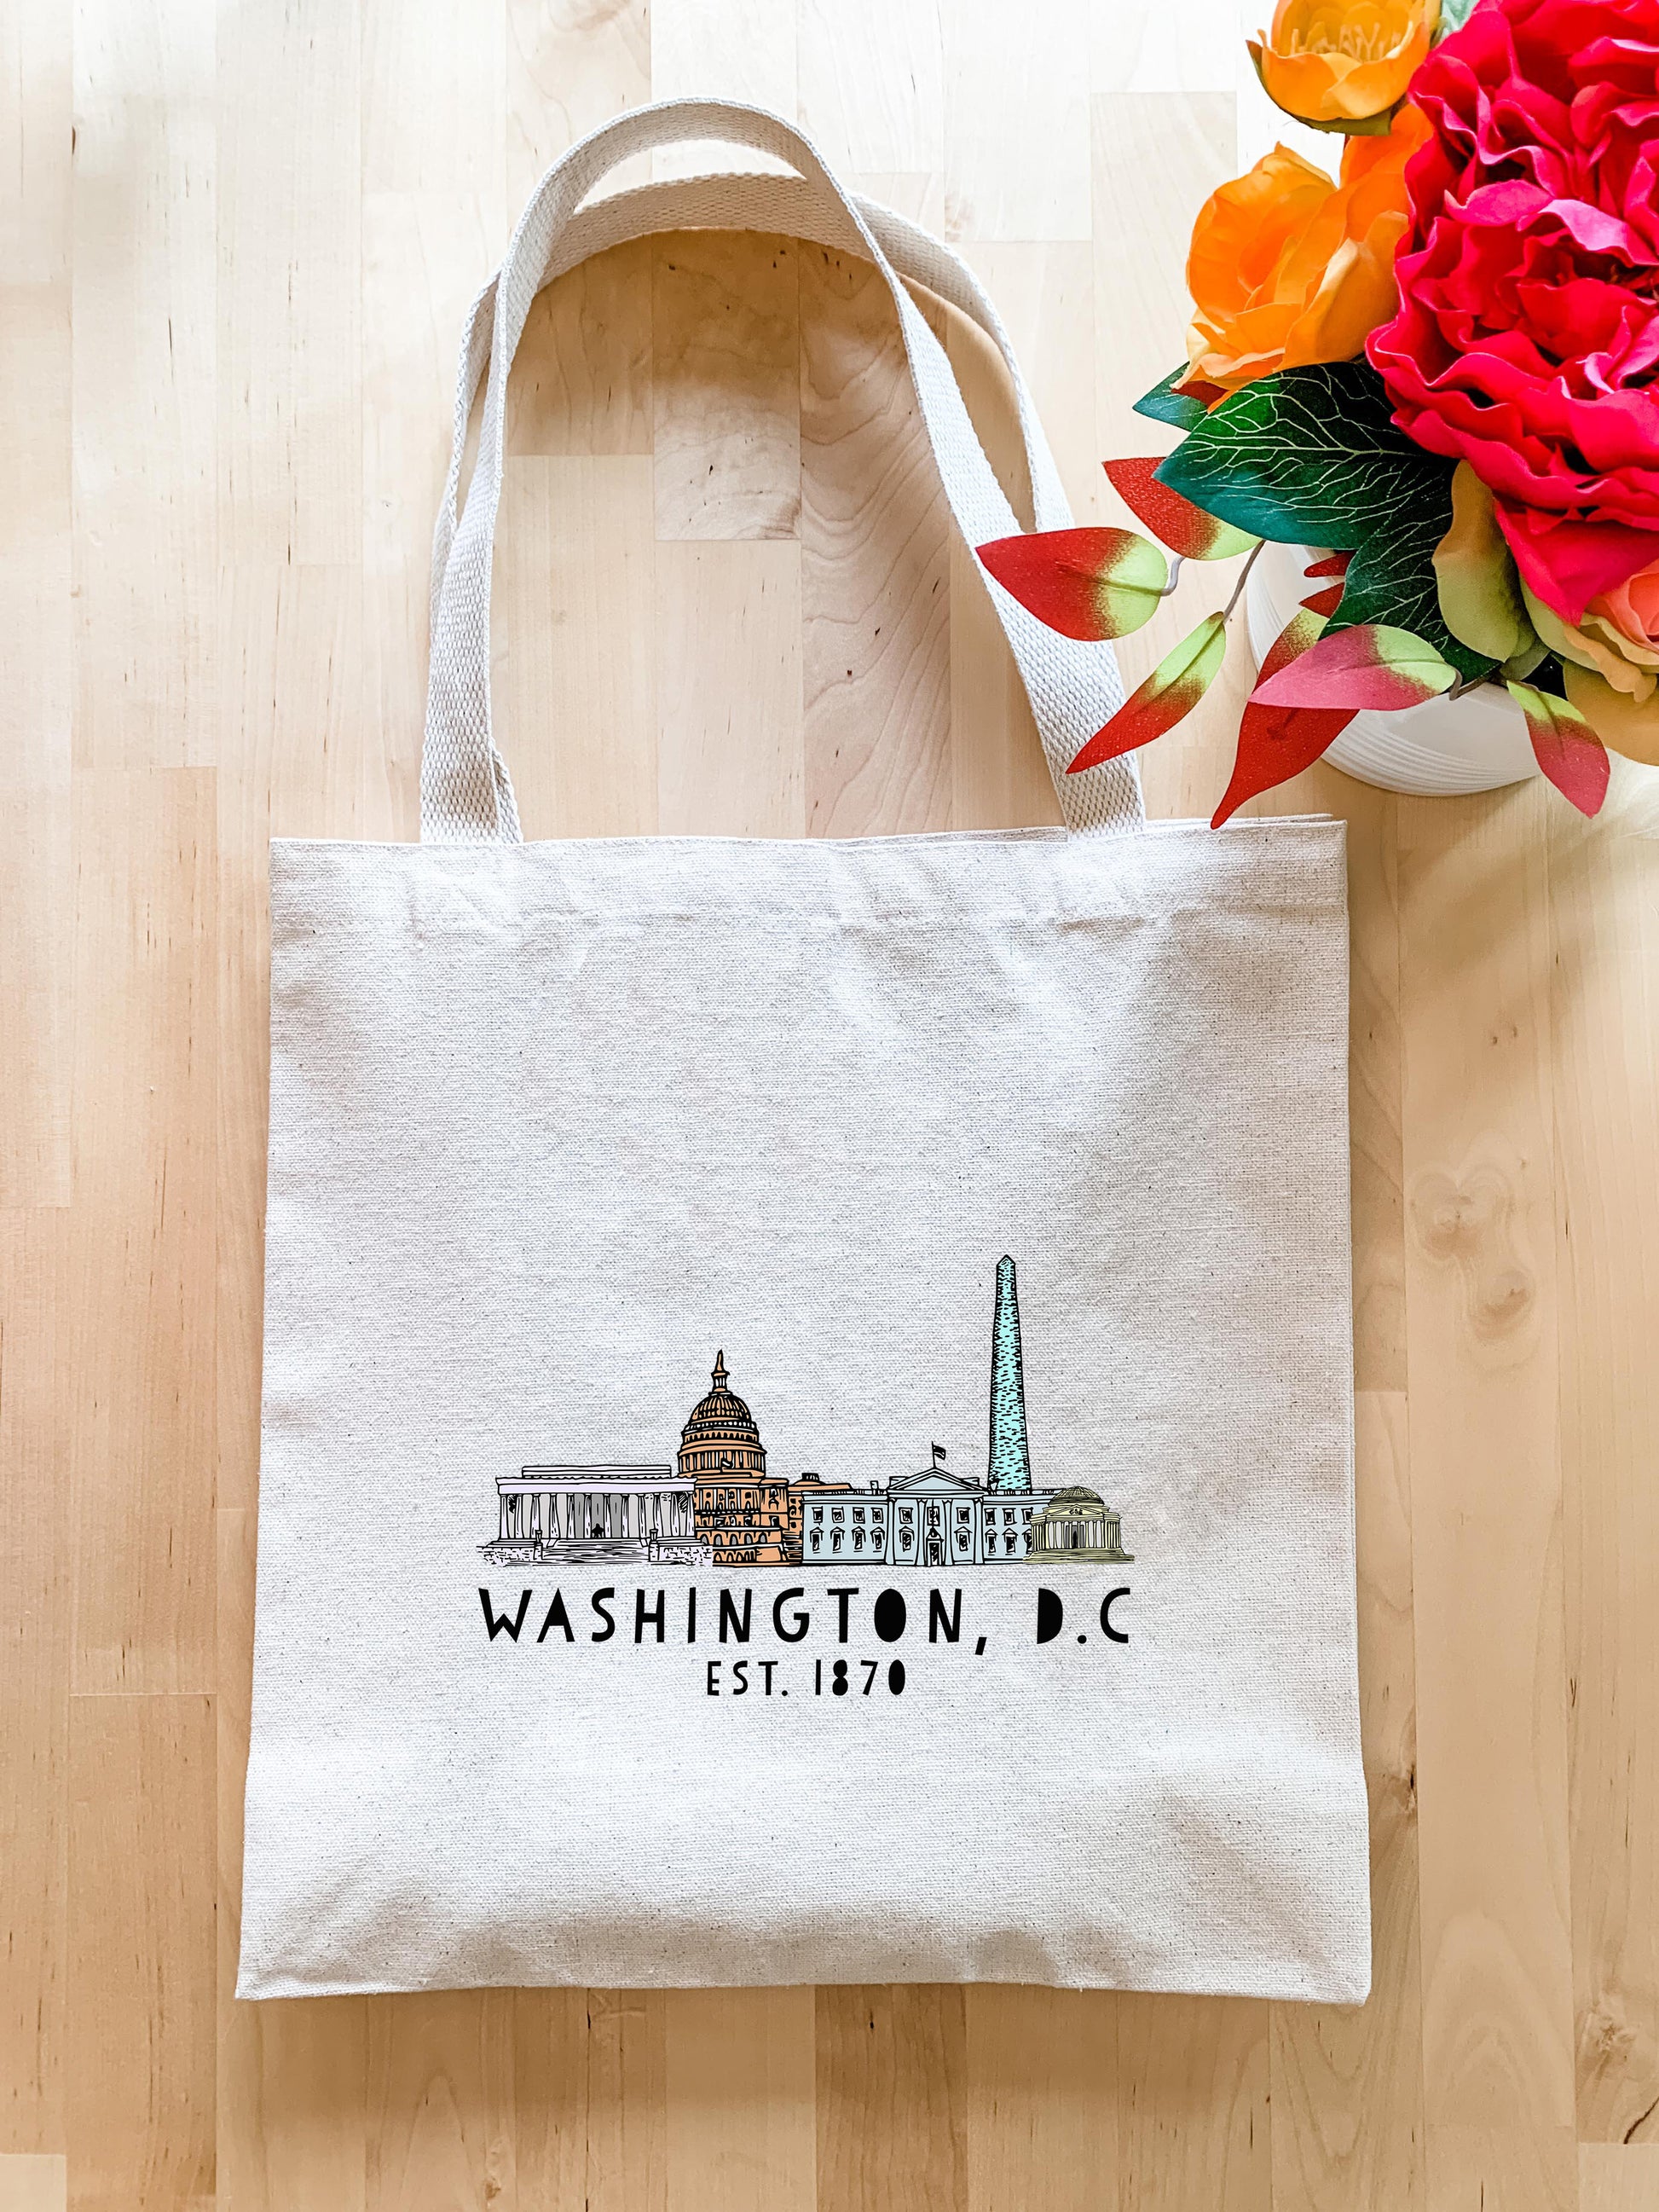 a white bag with washington dc on it next to a vase of flowers